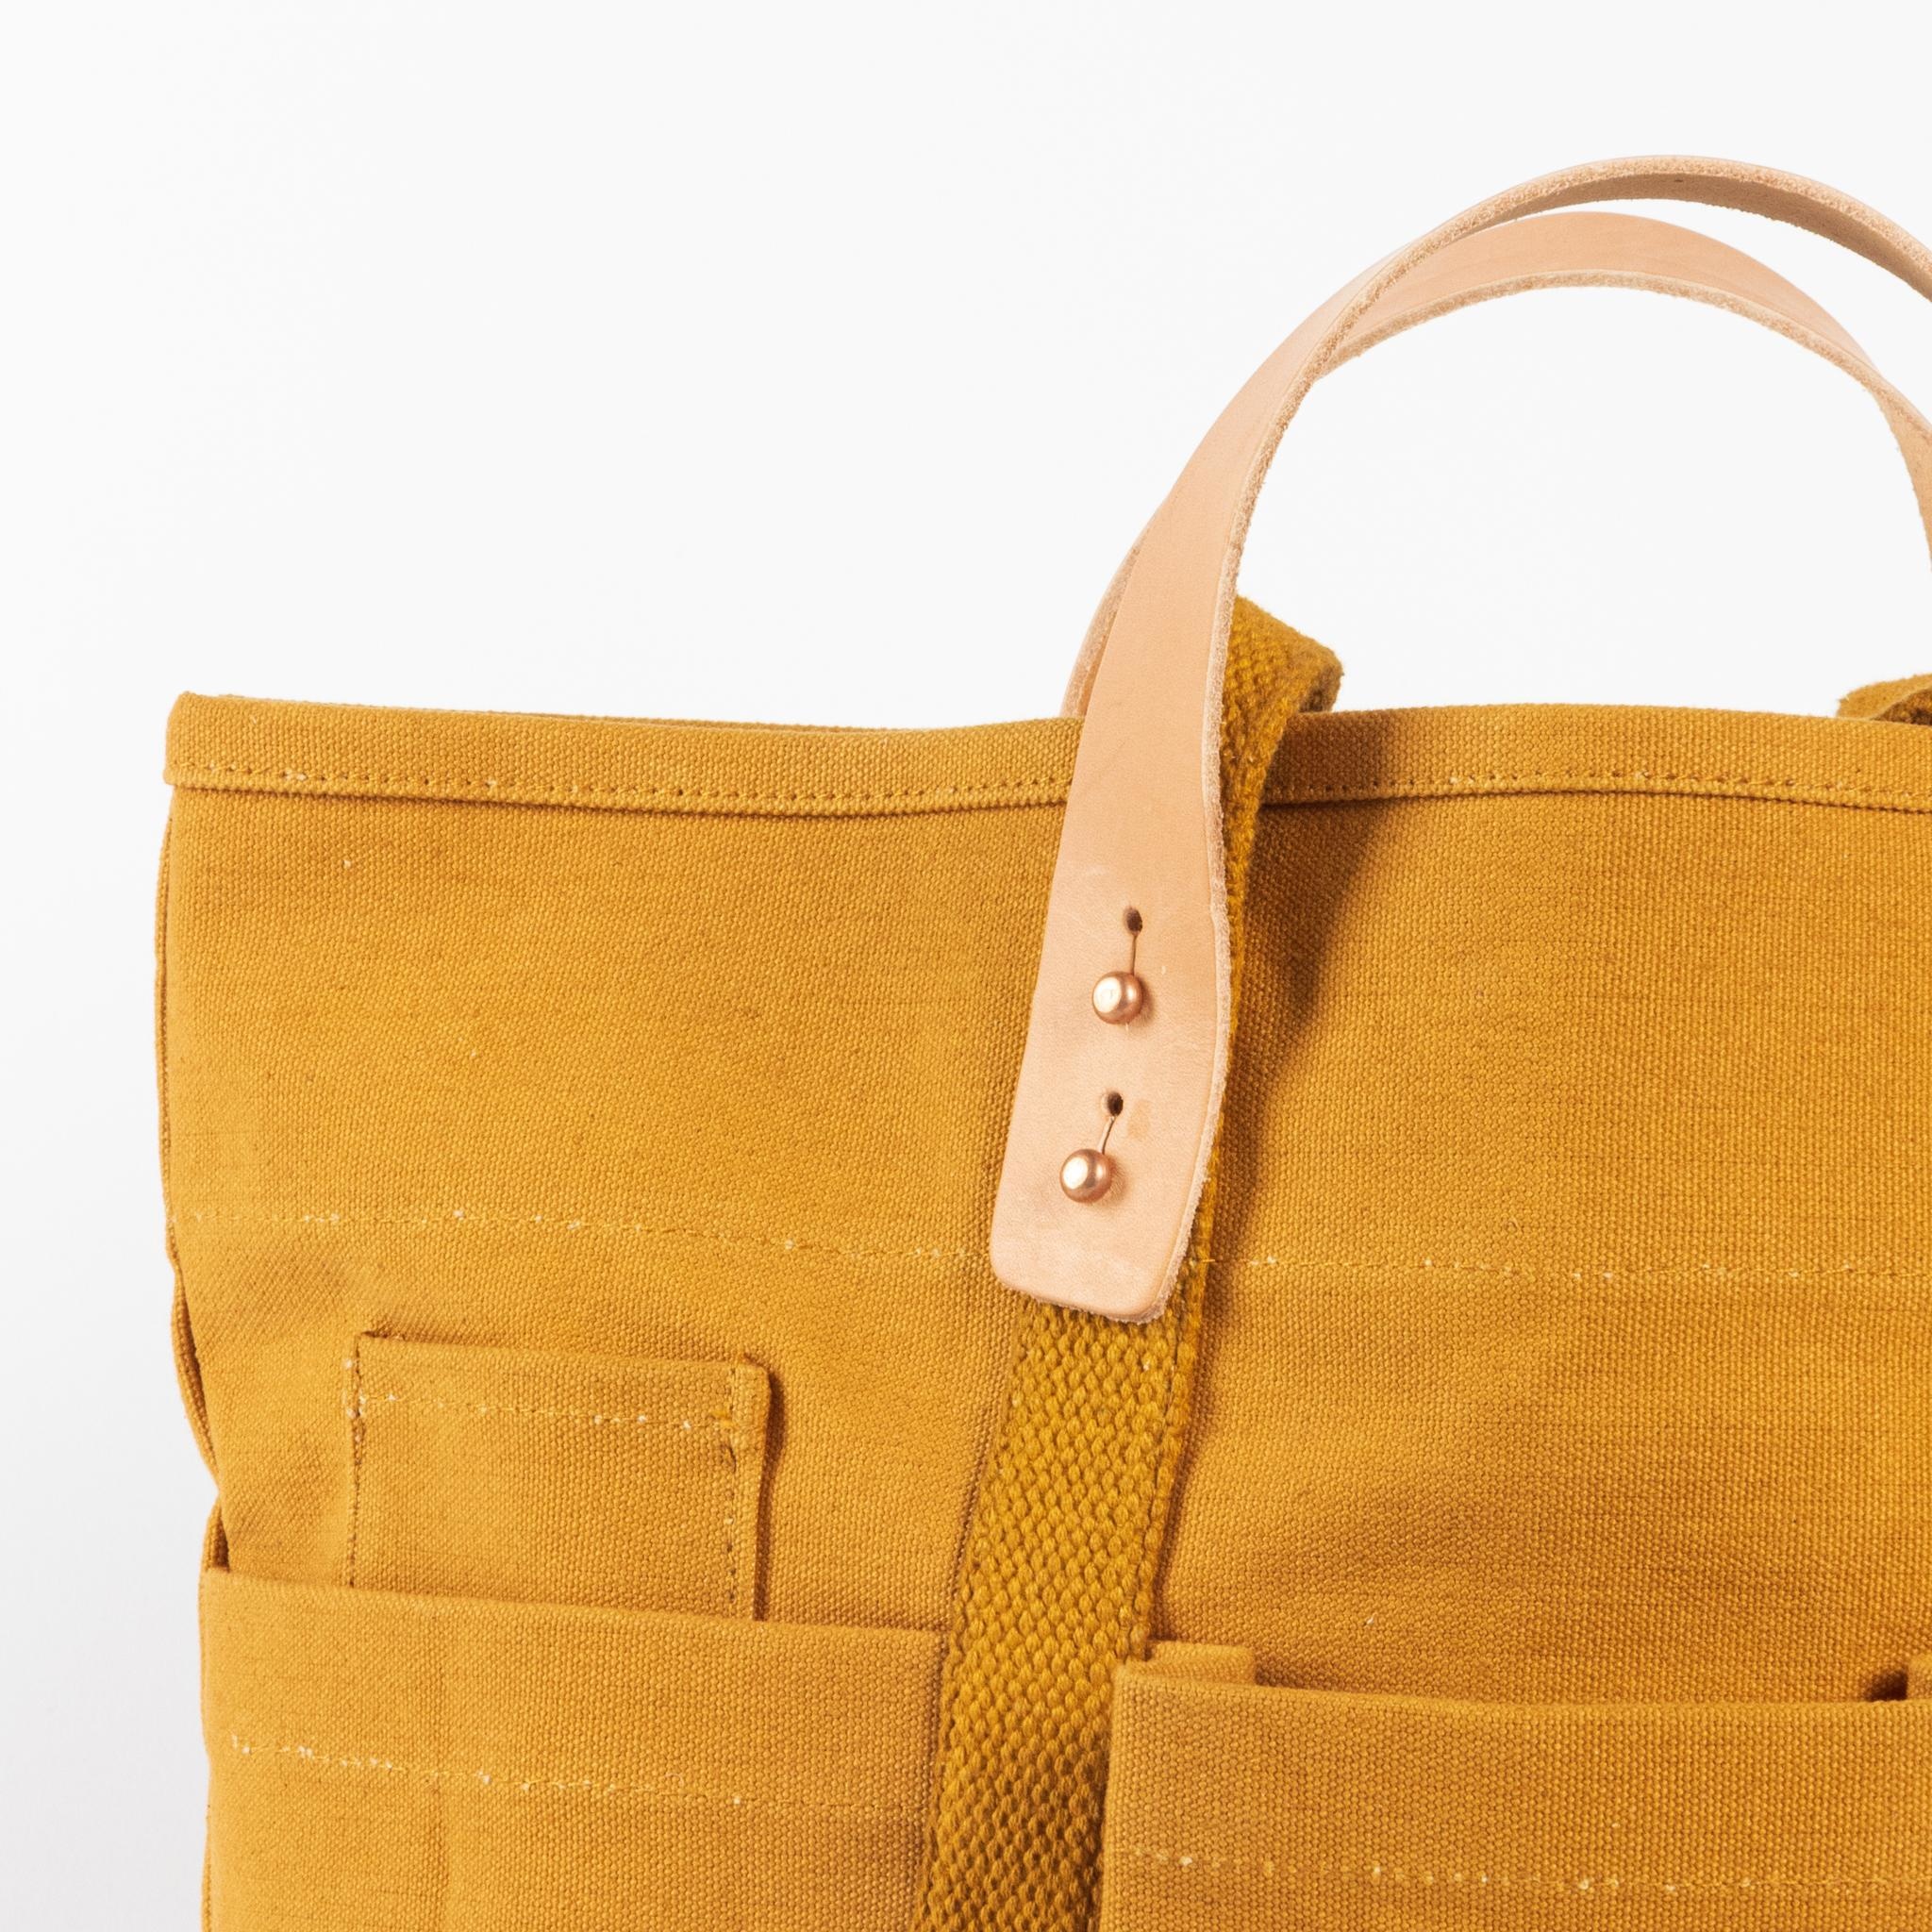 IMMODEST COTTON x Fleabags - IMC IMMODEST COTTON - Construction Tote in  Mustard Seed